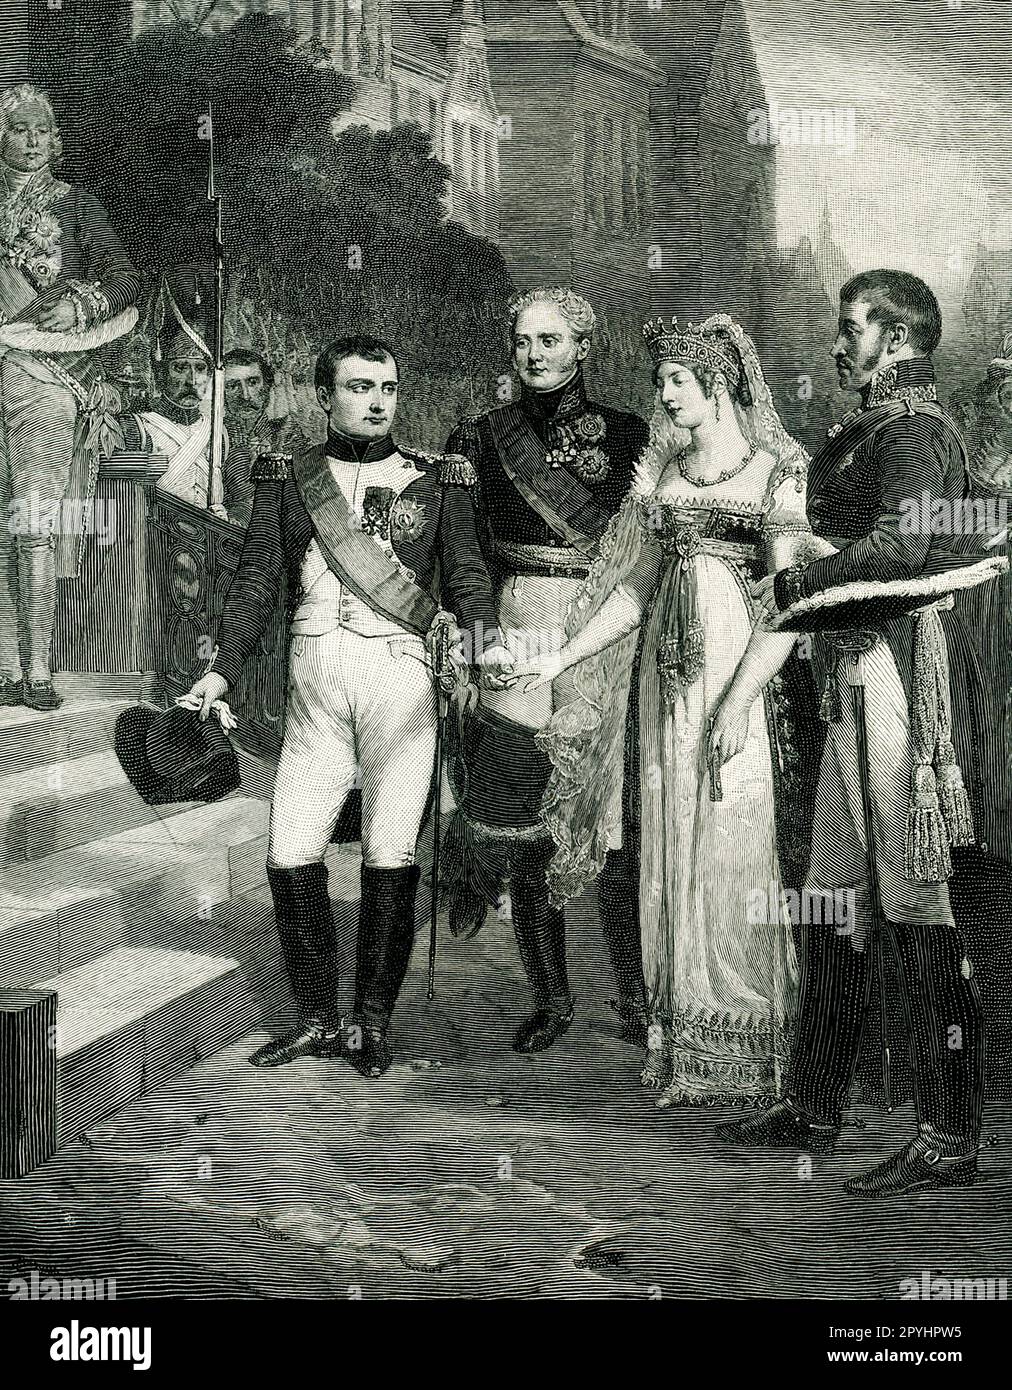 This image from an 1896 issue of Century Magazine shows Napoleon receiving the Queen of Prussia at Tilst on July 6, 1807. It is from a painting by Nicolas-Louis-Francois Gosse that is in the museum of Versailles that was engraved by Peter Aitken. Stock Photo